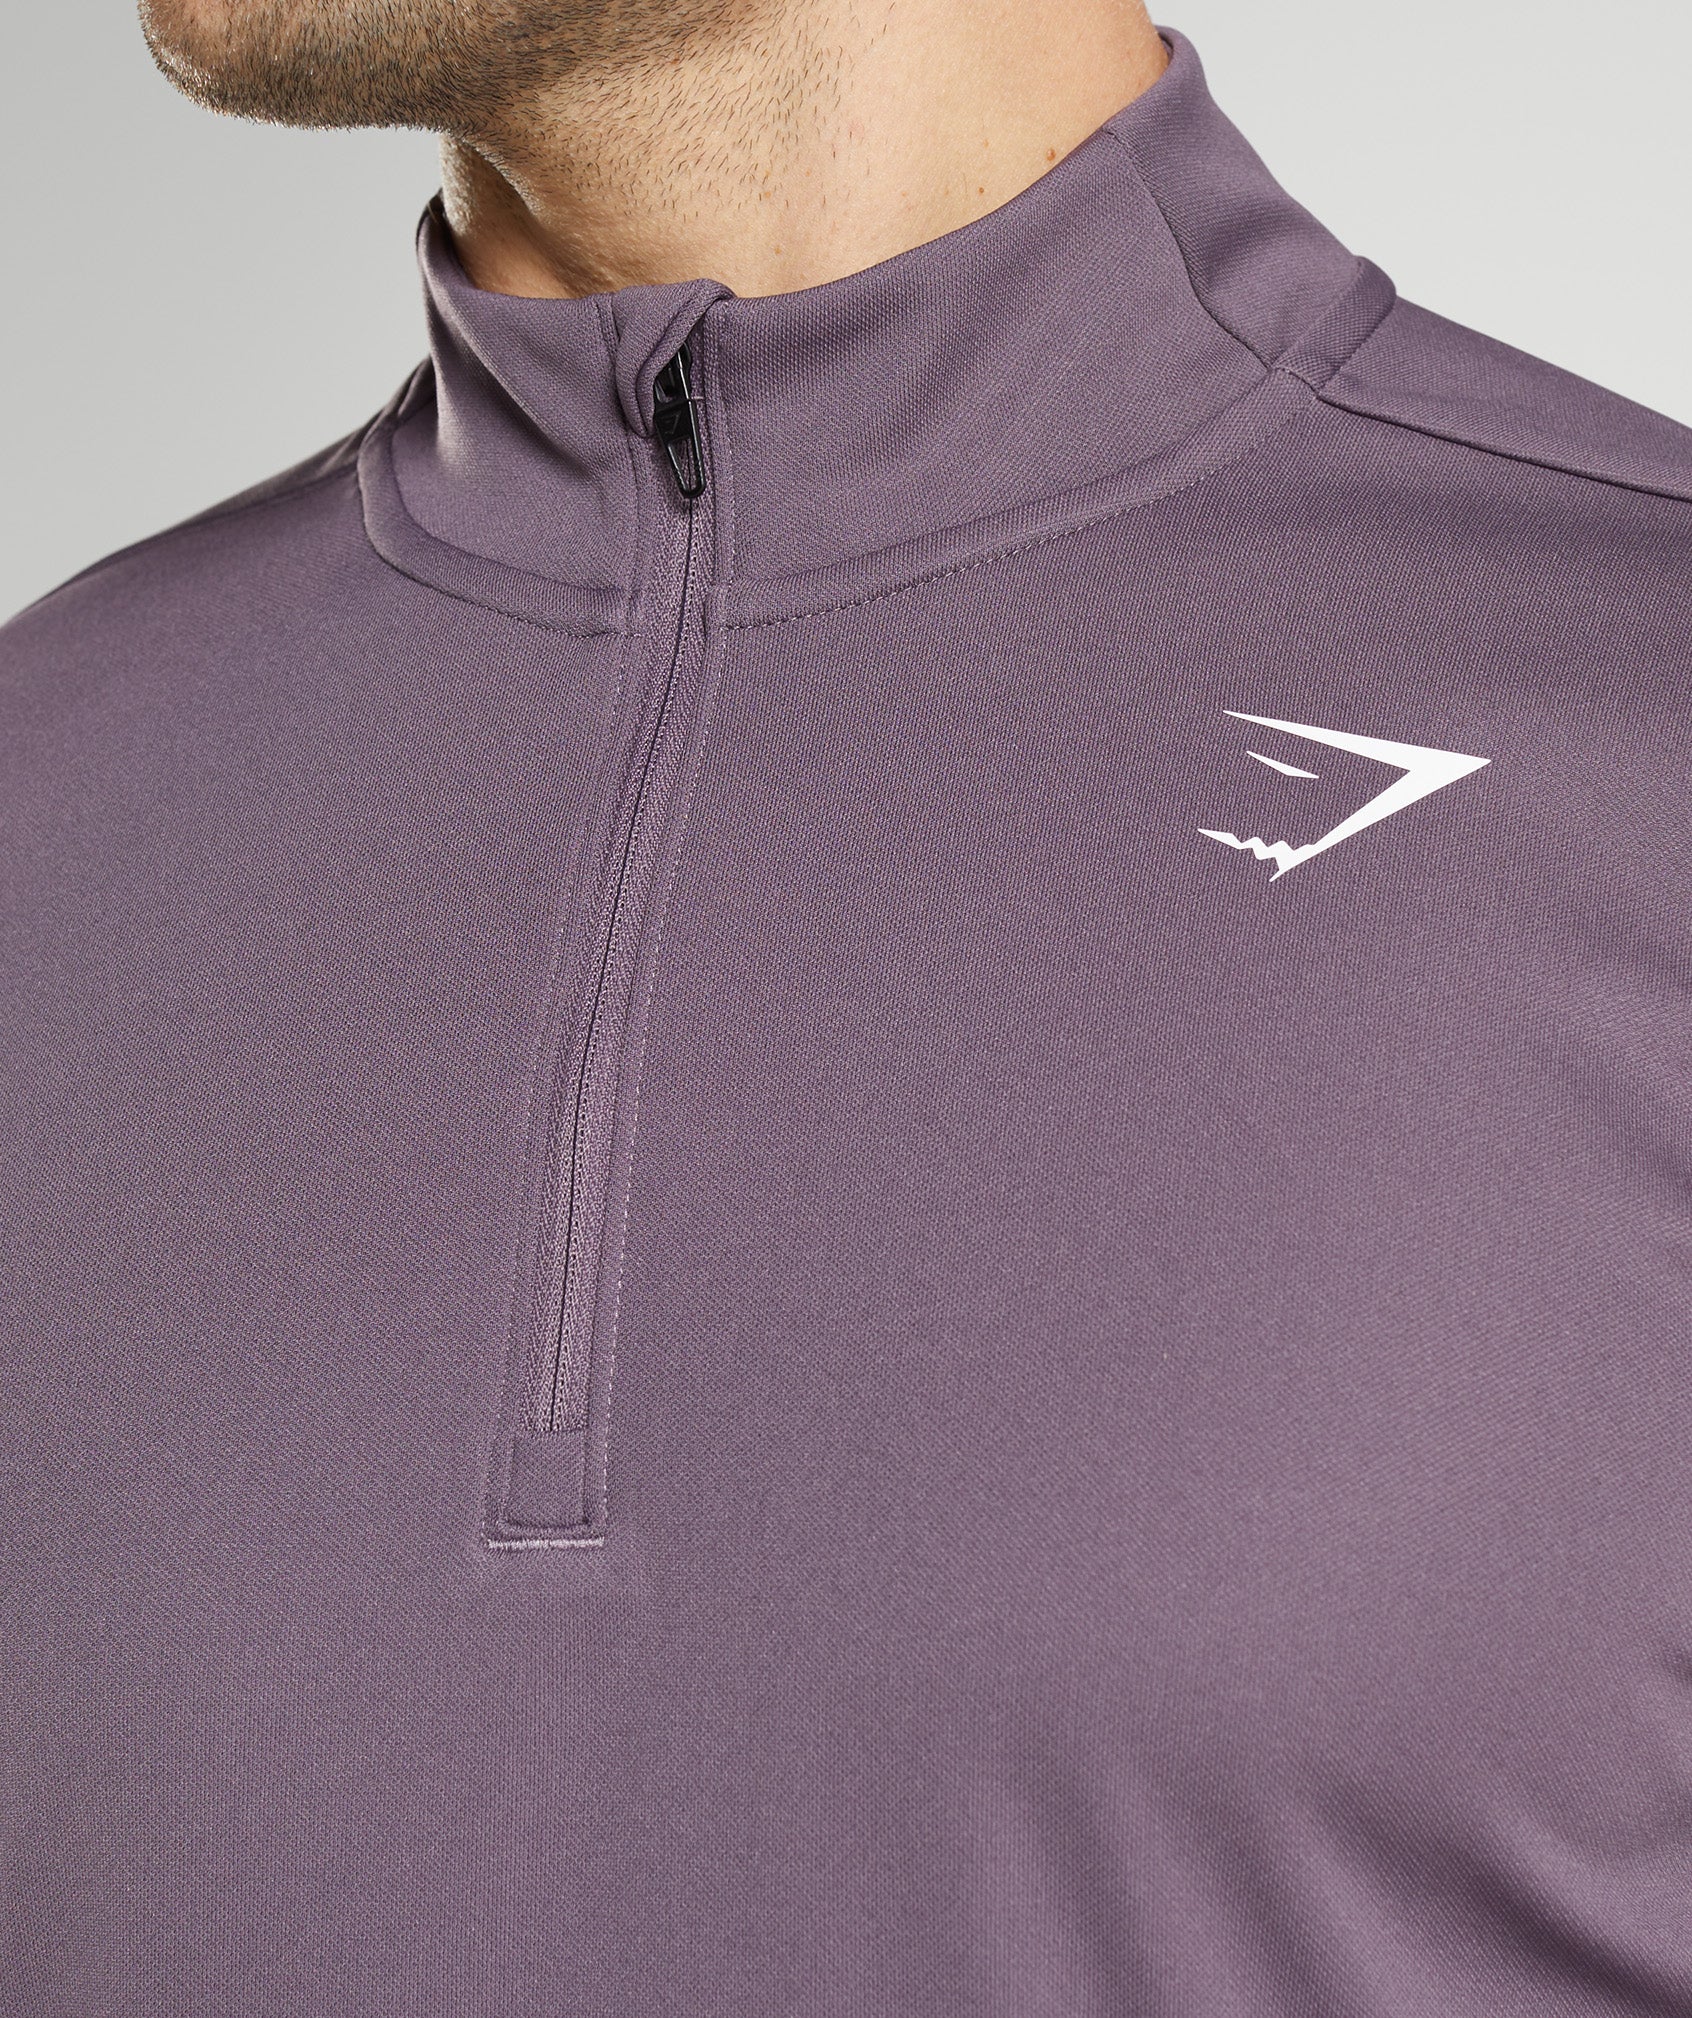 Arrival 1/4 Zip Pullover in Musk Lilac